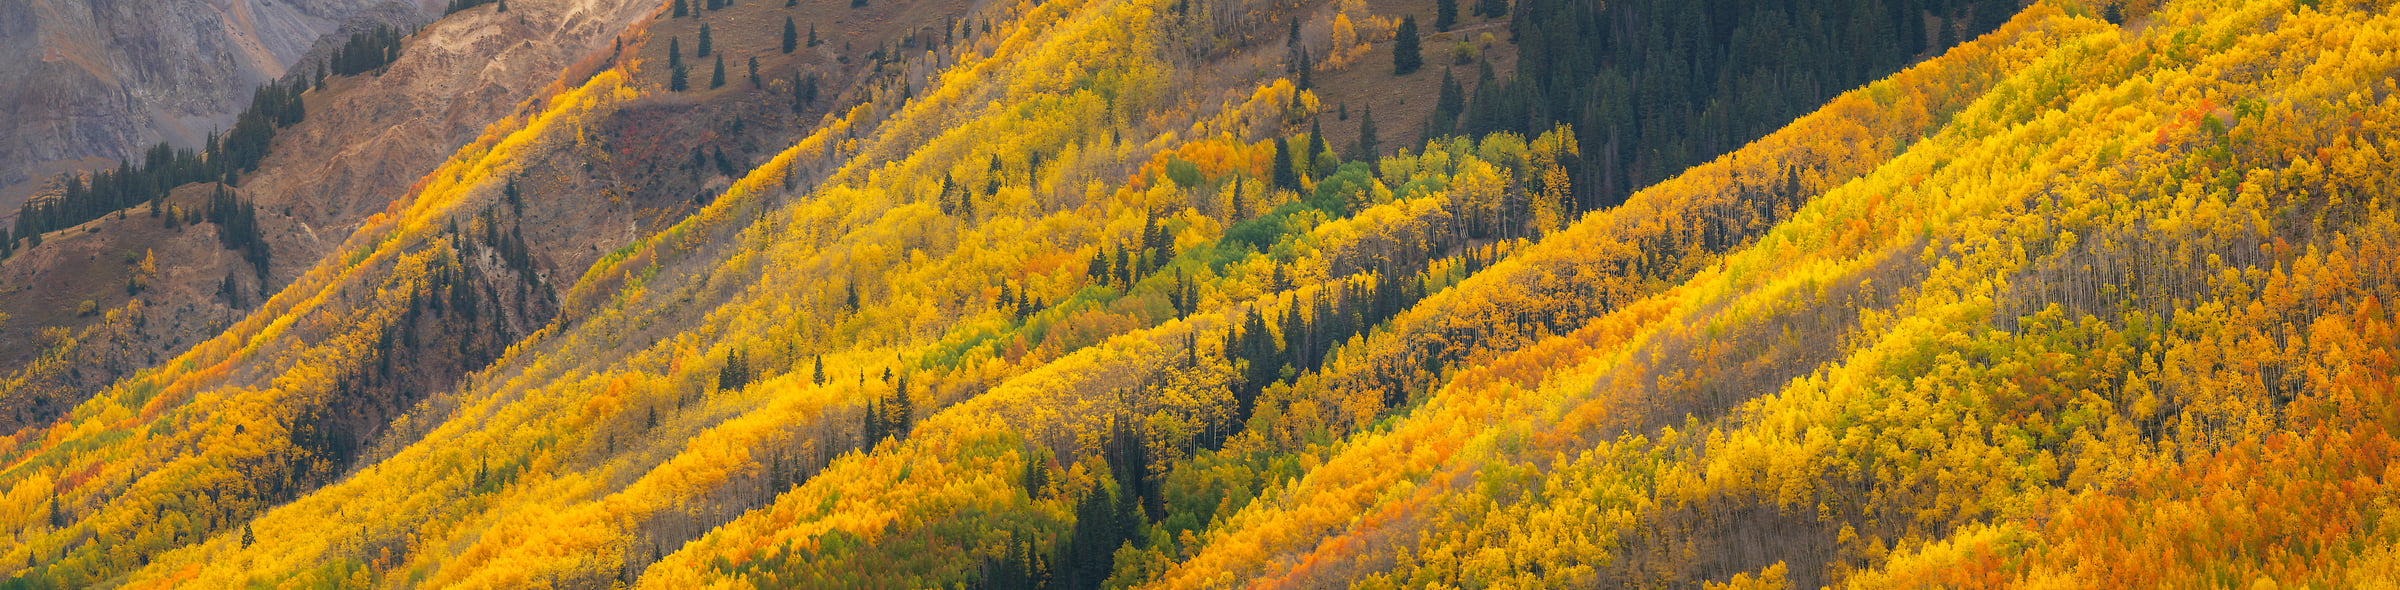 303 megapixels! A very high resolution, large-format VAST photo print of gold trees on a hillside in autumn; landscape photograph created by Jeff Lewis in Ouray, Colorado.